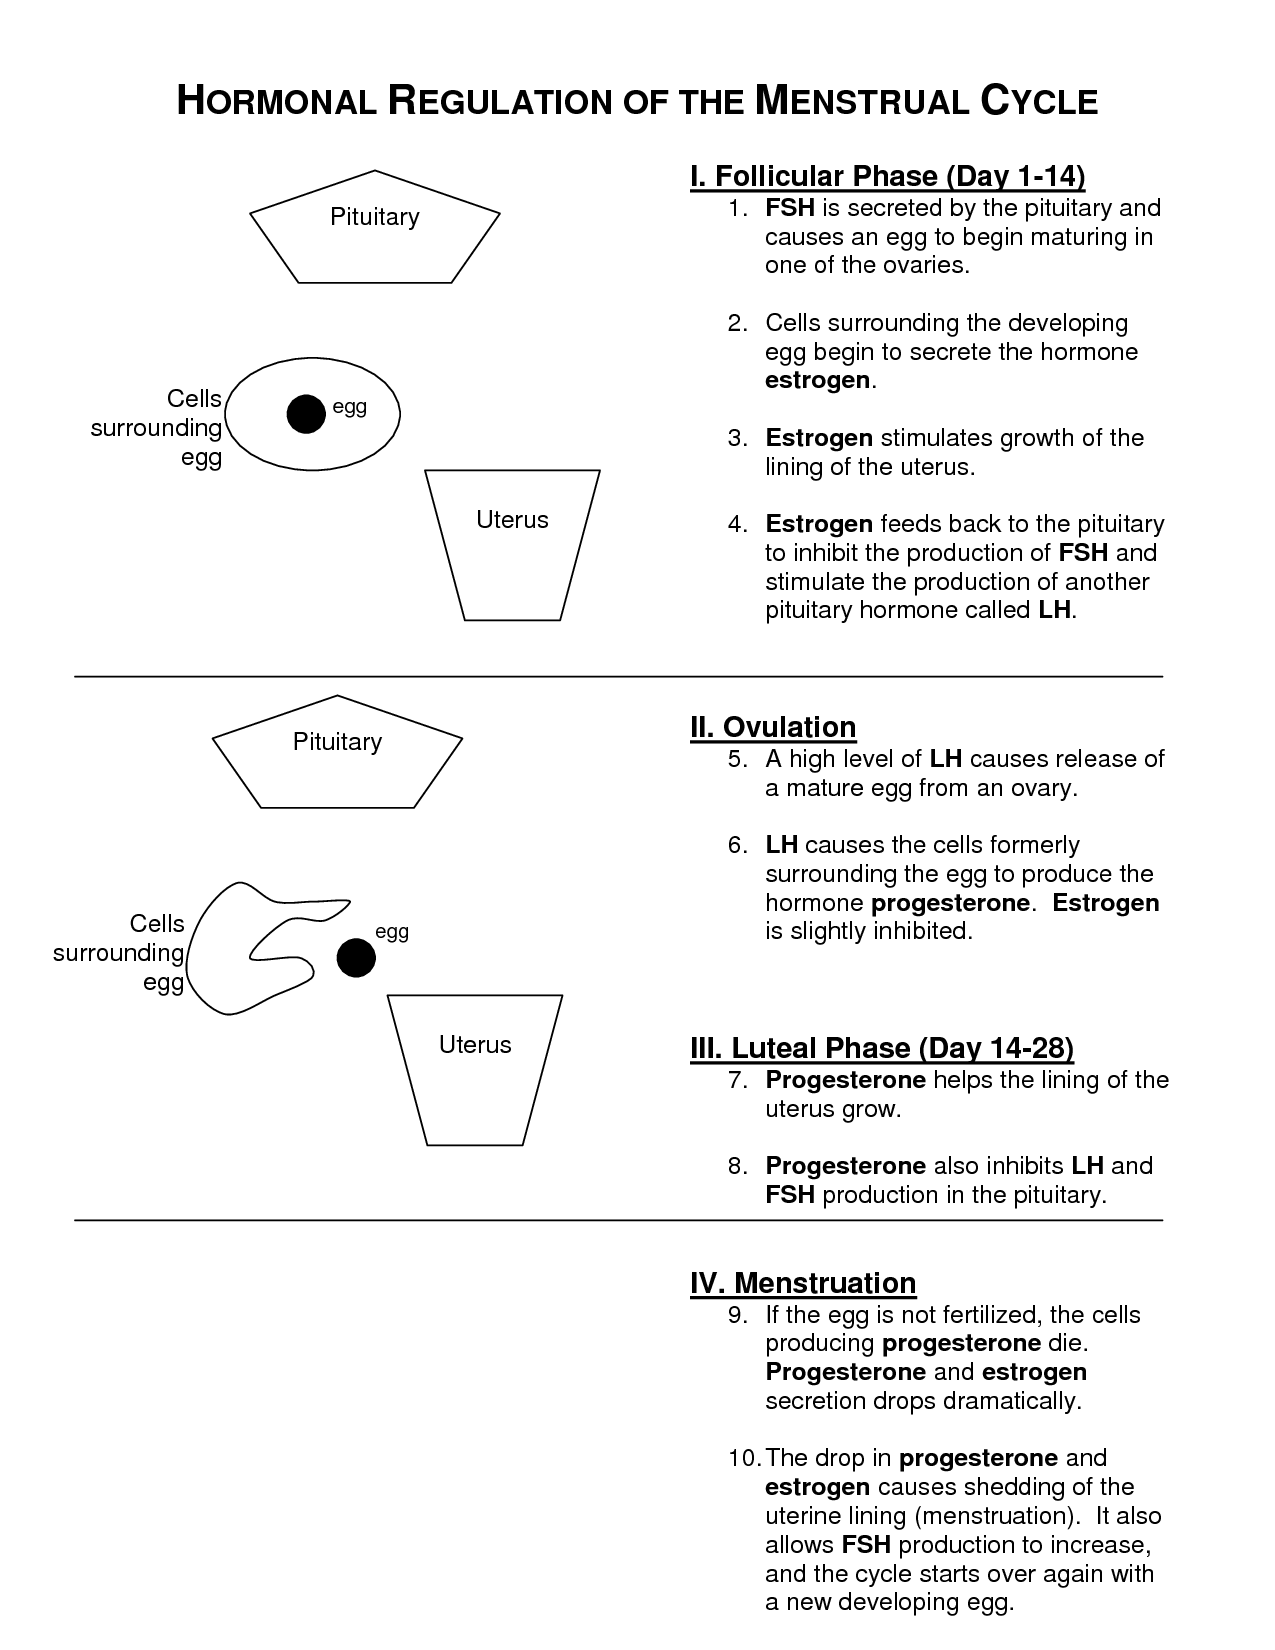 14-best-images-of-time-cycle-worksheets-precipitation-water-cycle-worksheets-time-study